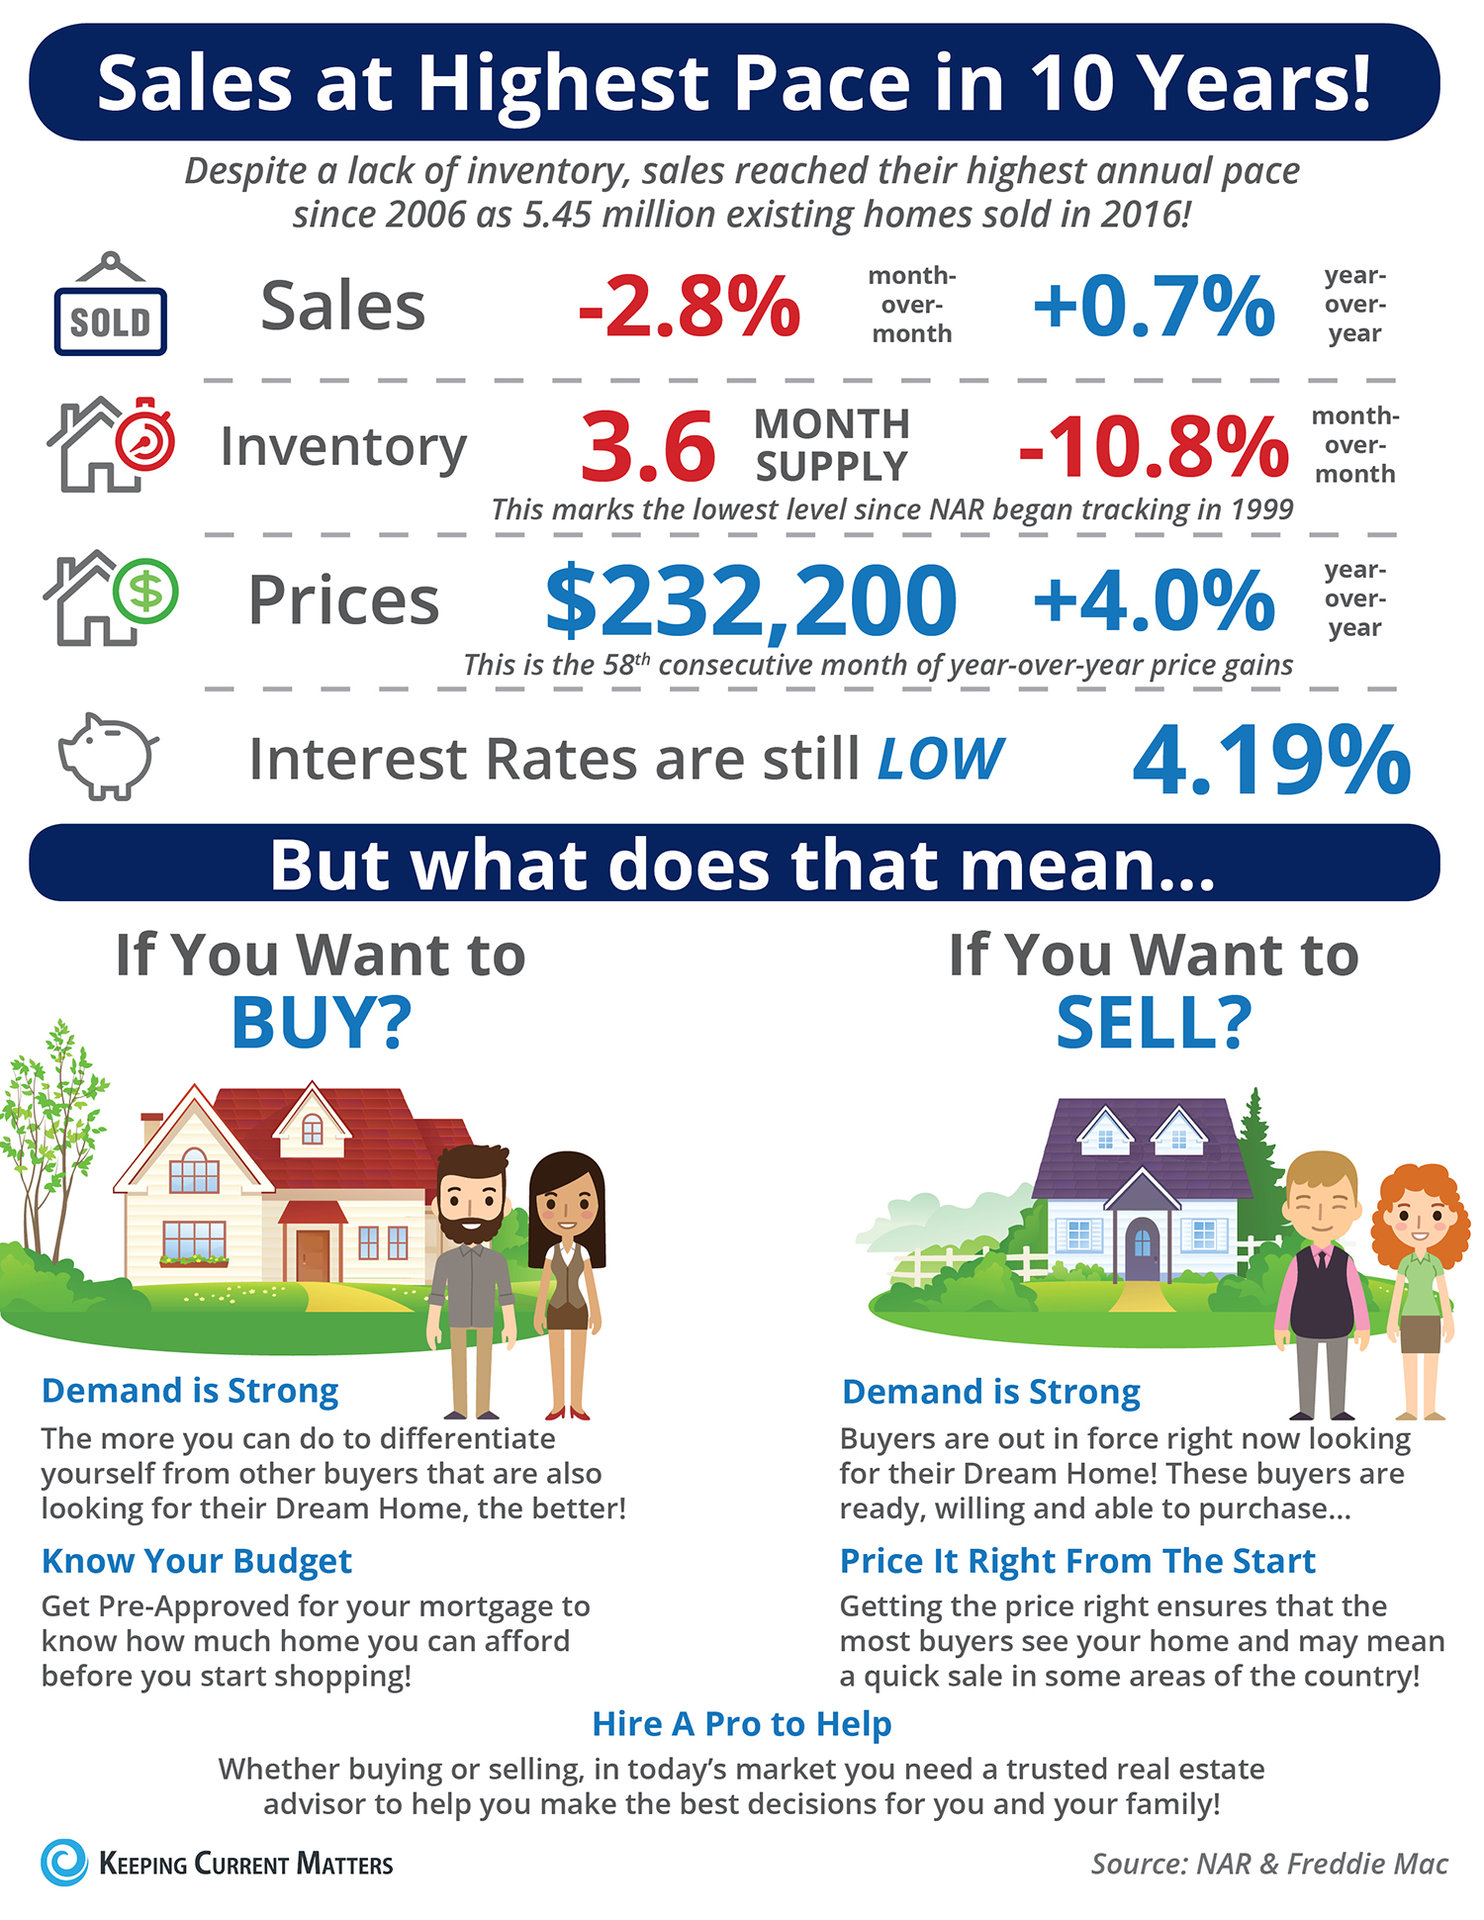 Sales at Highest Pace in 10 Years! [INFOGRAPHIC] | Keeping Current Matters